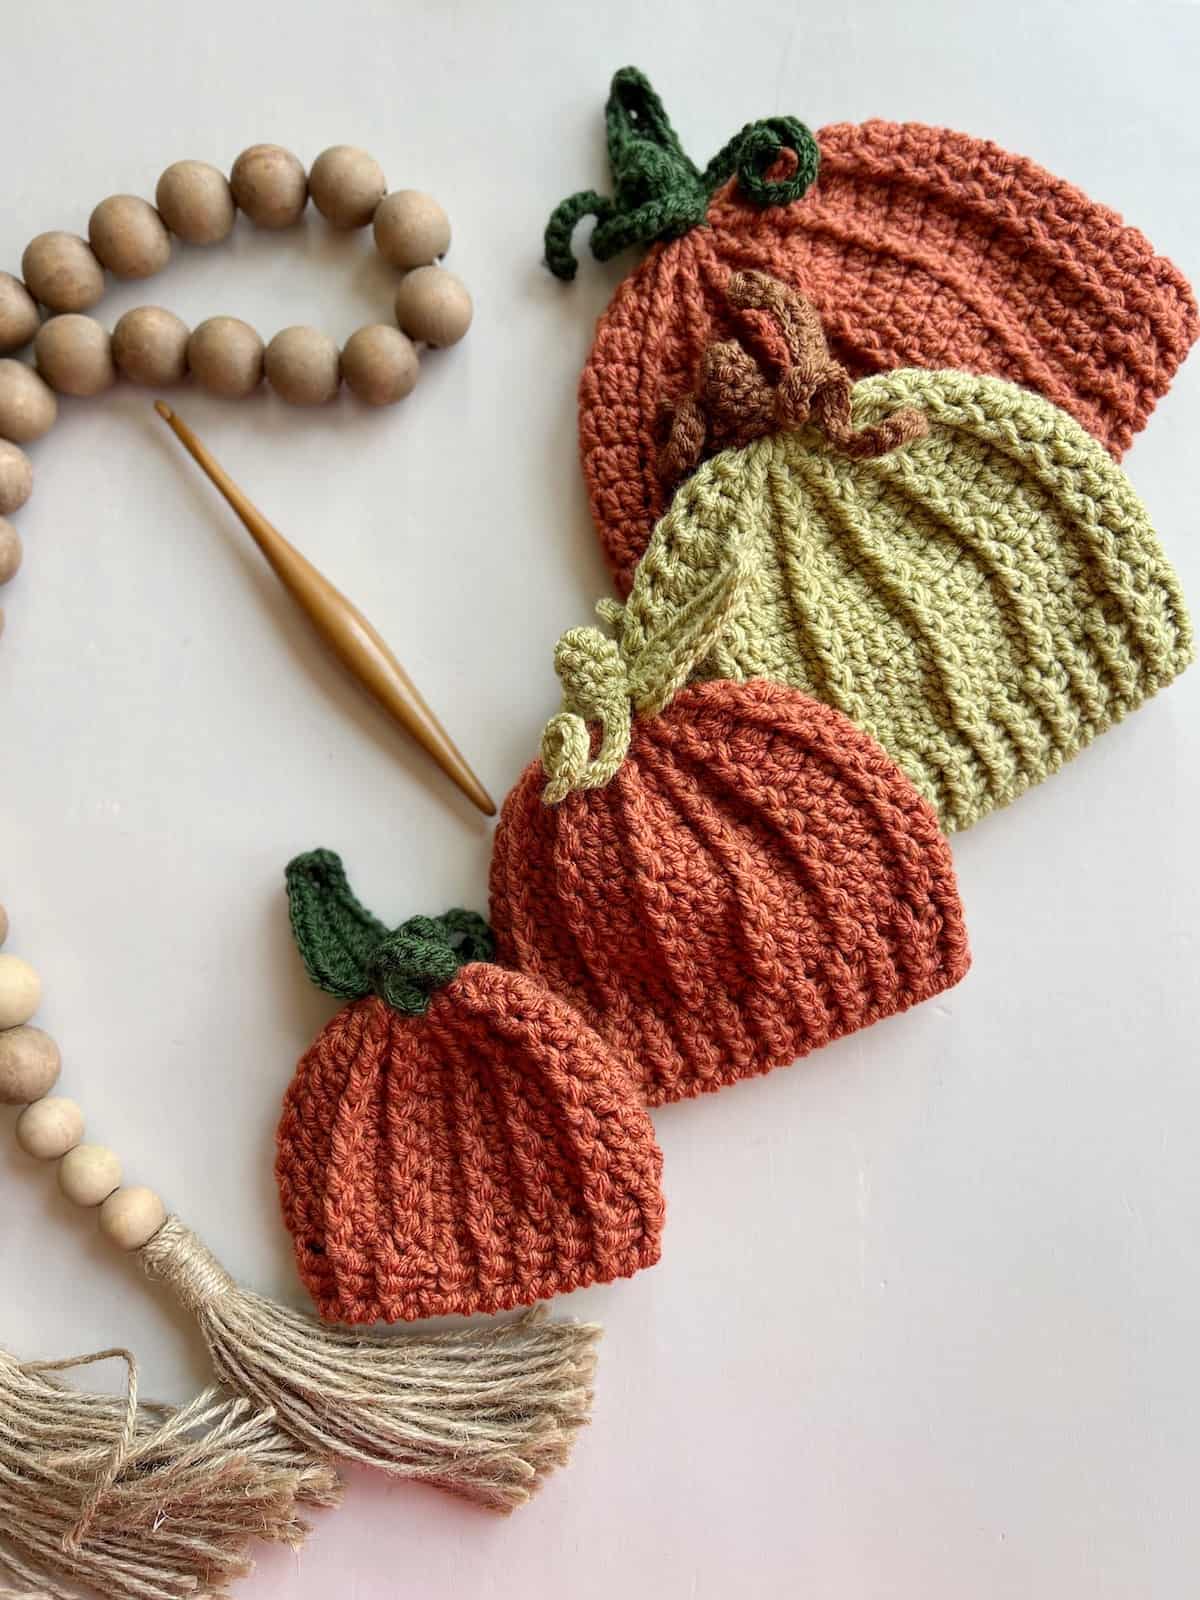 Crochet pumpkin hat pattern for beginners in four sizes from baby to adult.